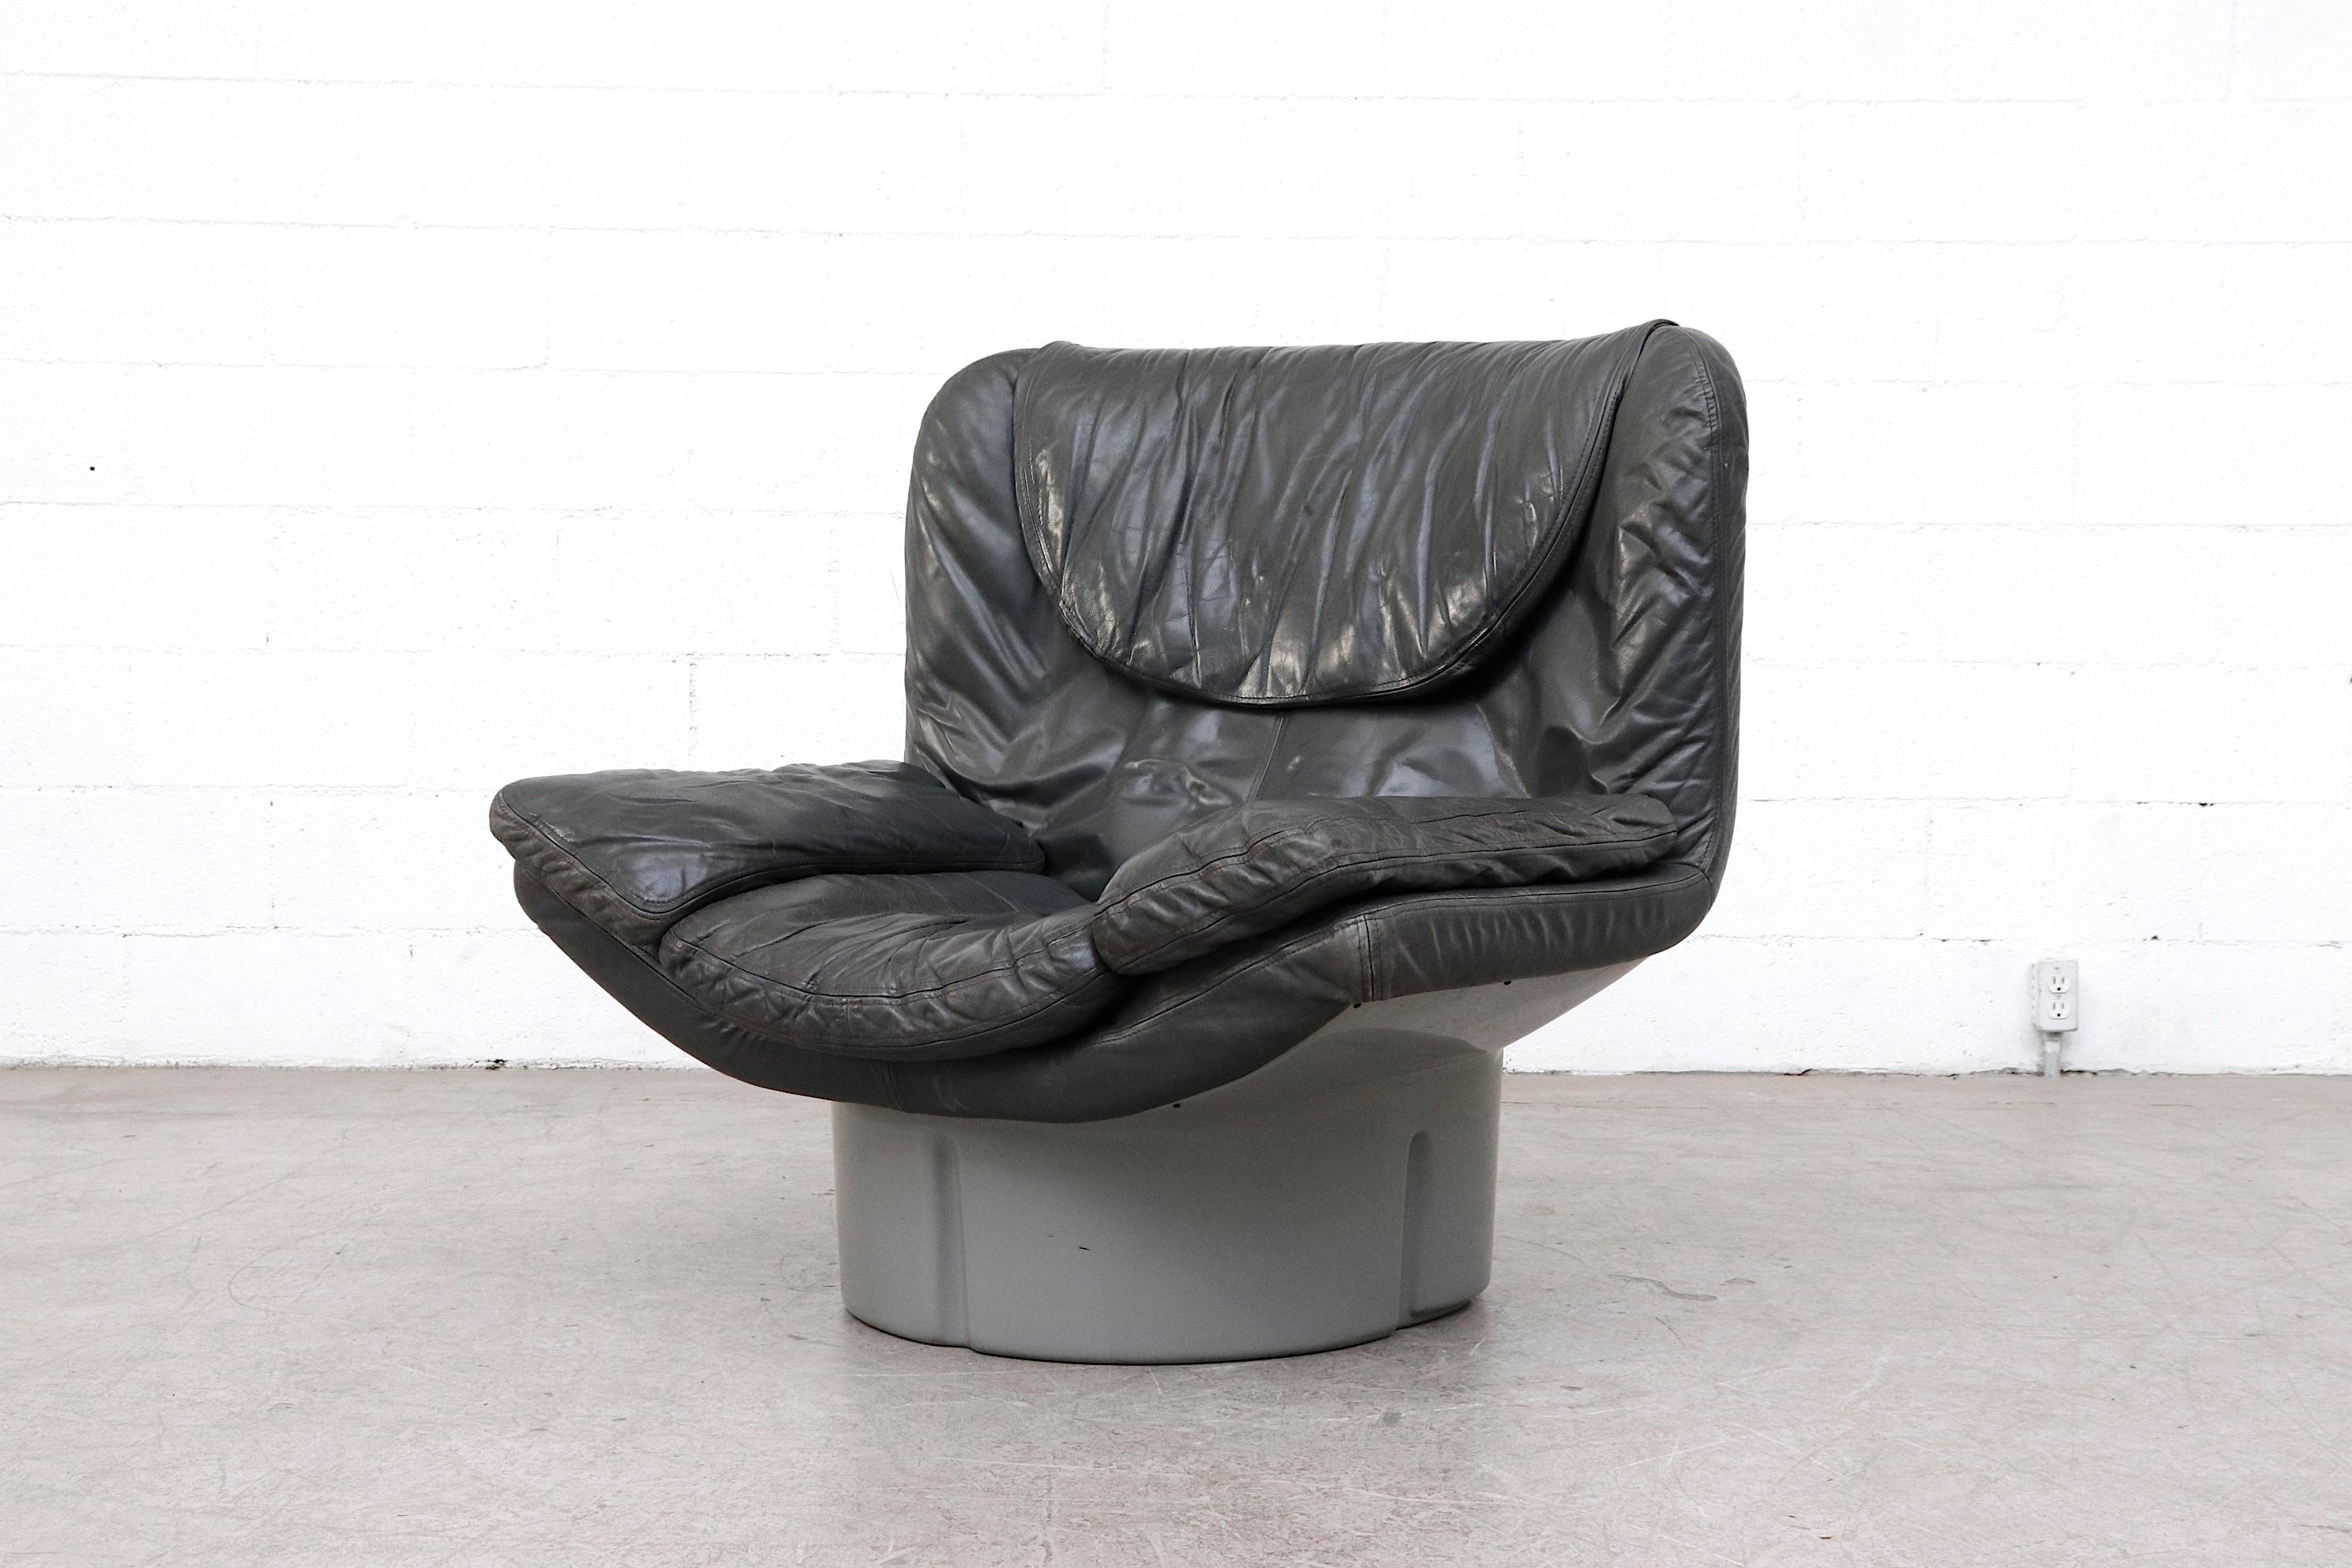 Il Poltrone lounge chair as part of the i Potoni 175 series designed by T. Ammannati and G.P. Vitelli. Dark grey leather with steel grey molded acrylic base. Superbly comfortable lounger in black leather. Some visible color fading and patina on